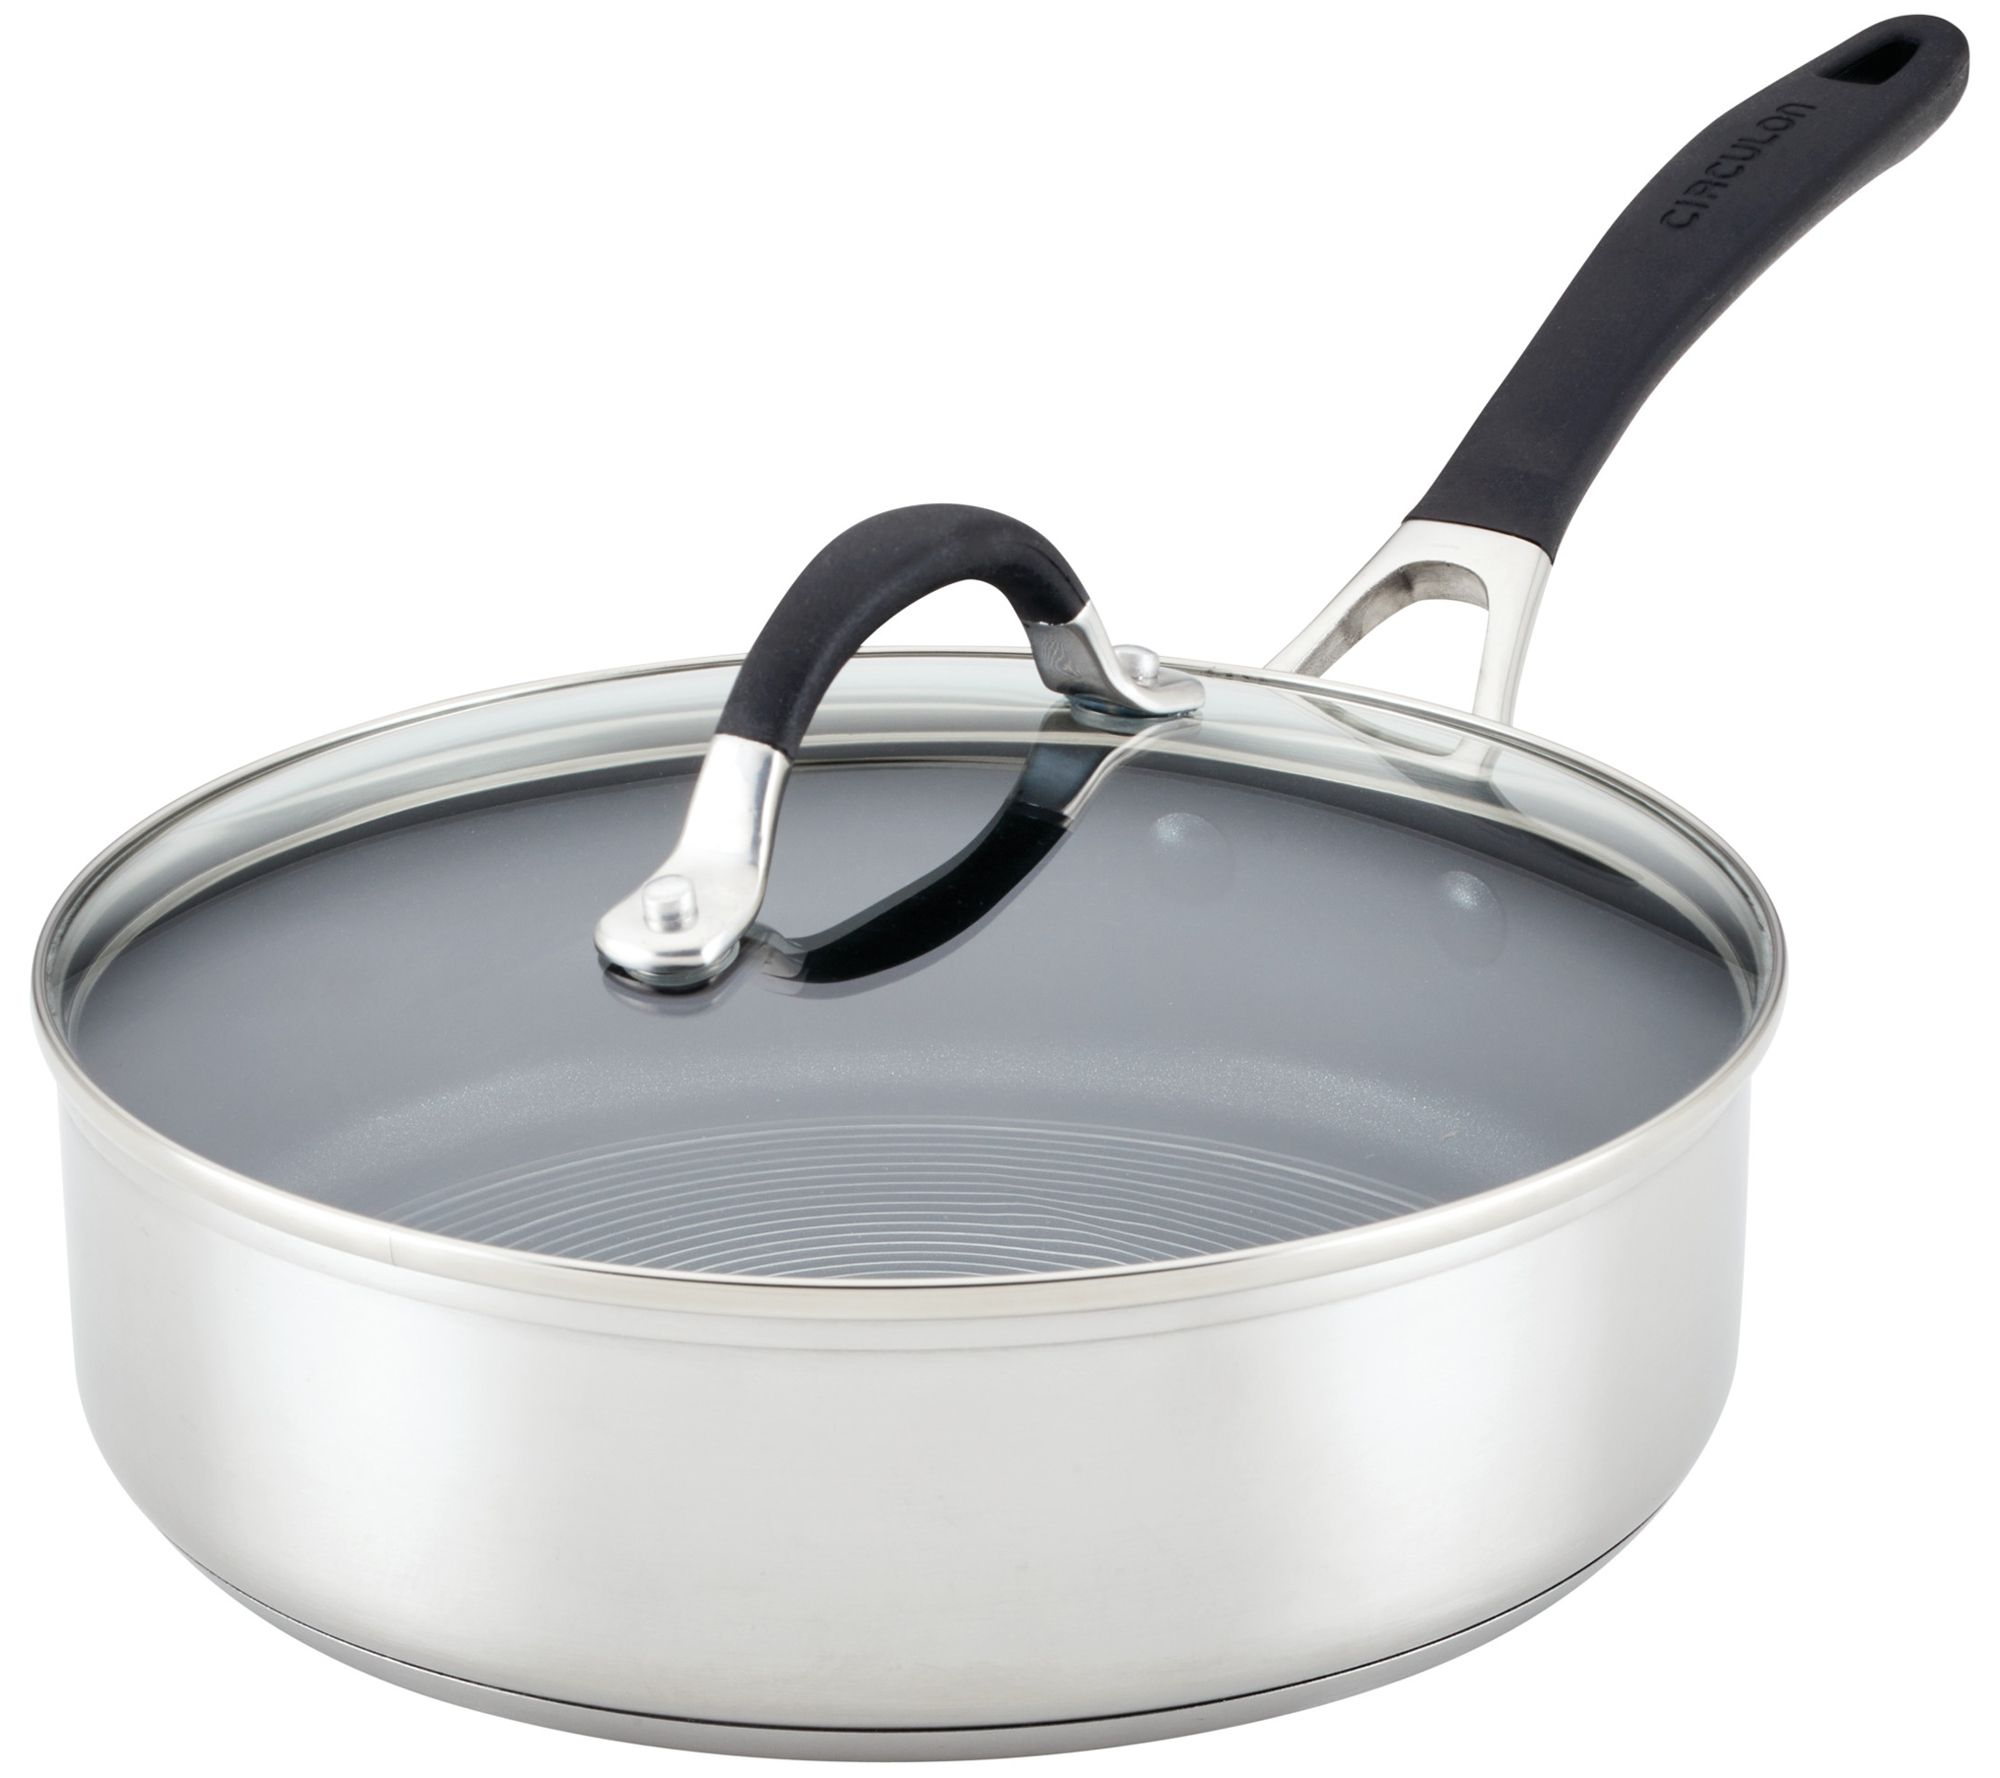 KitchenAid 3-Ply Base Brushed Stainless Steel Deep Saute Pan with Helper Handle and Lid, 4.5 Quart